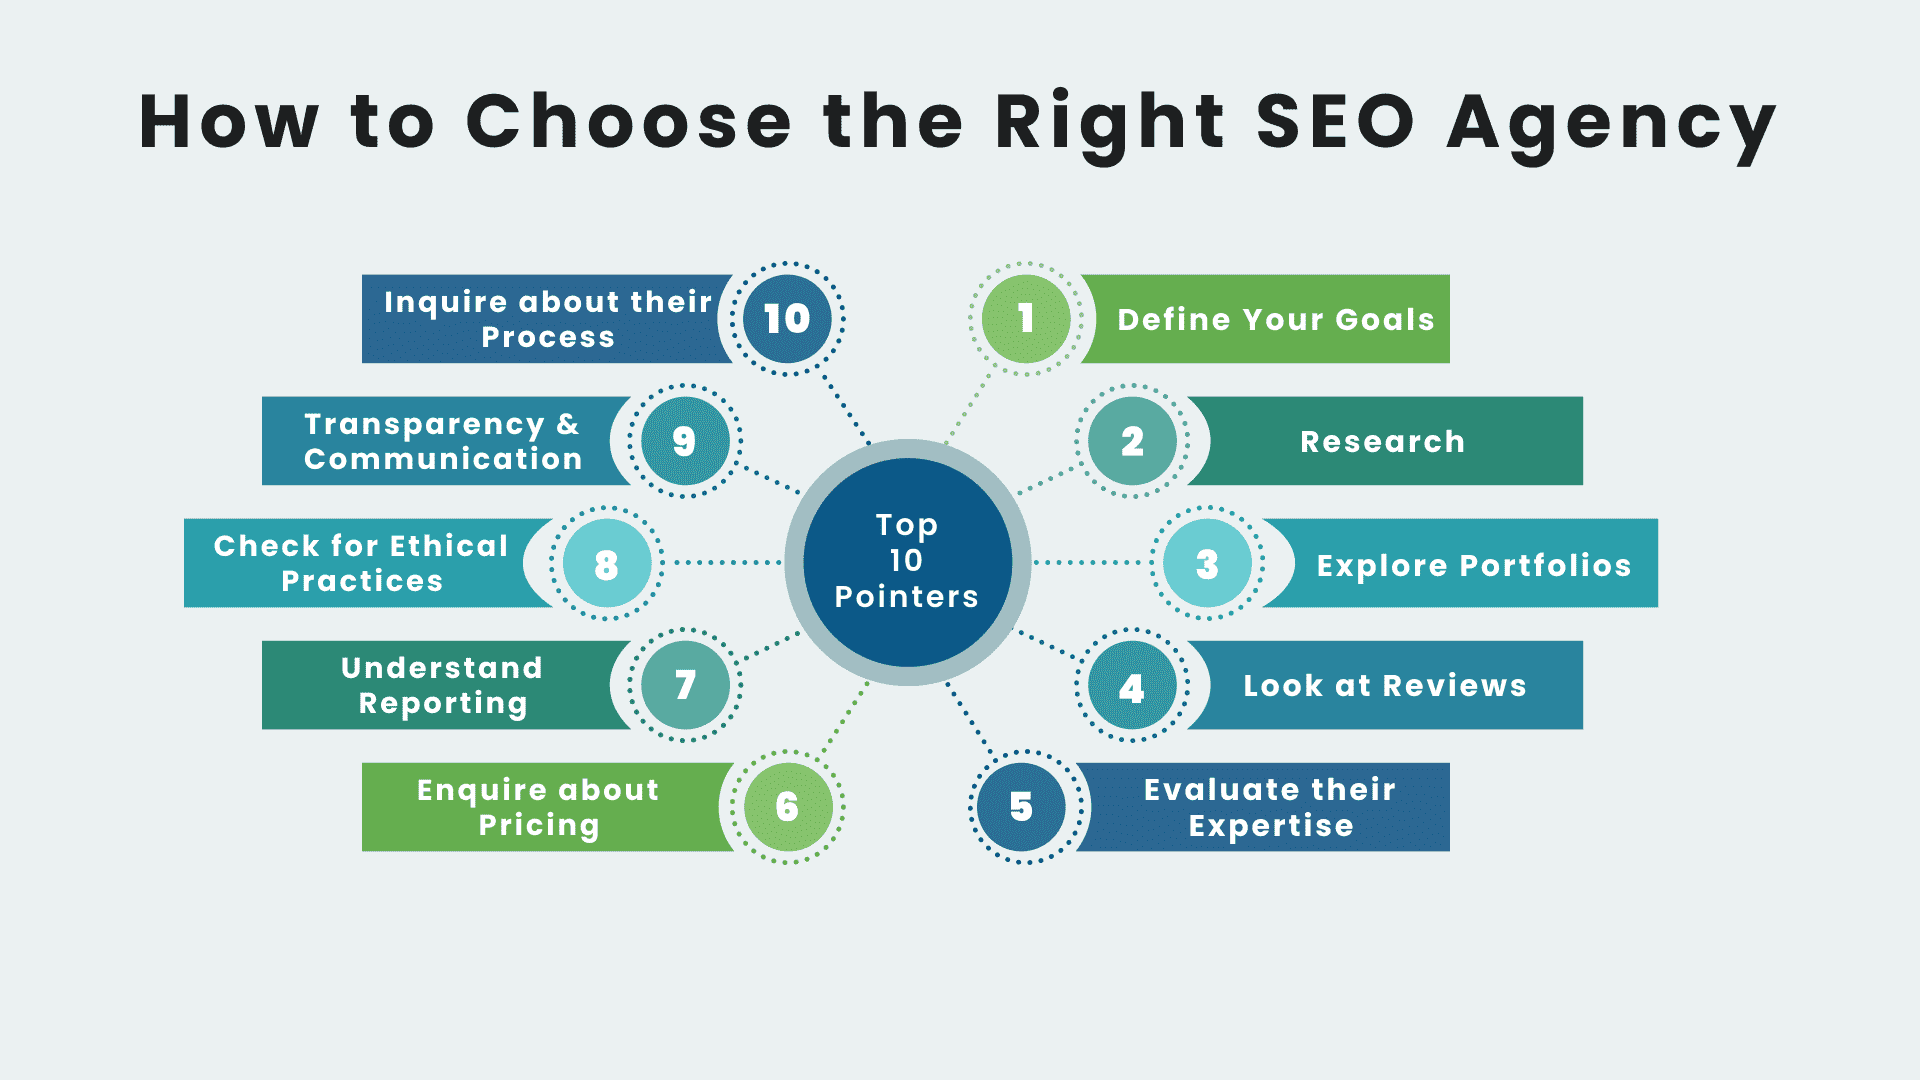 factors to help you choose the right SEO agency